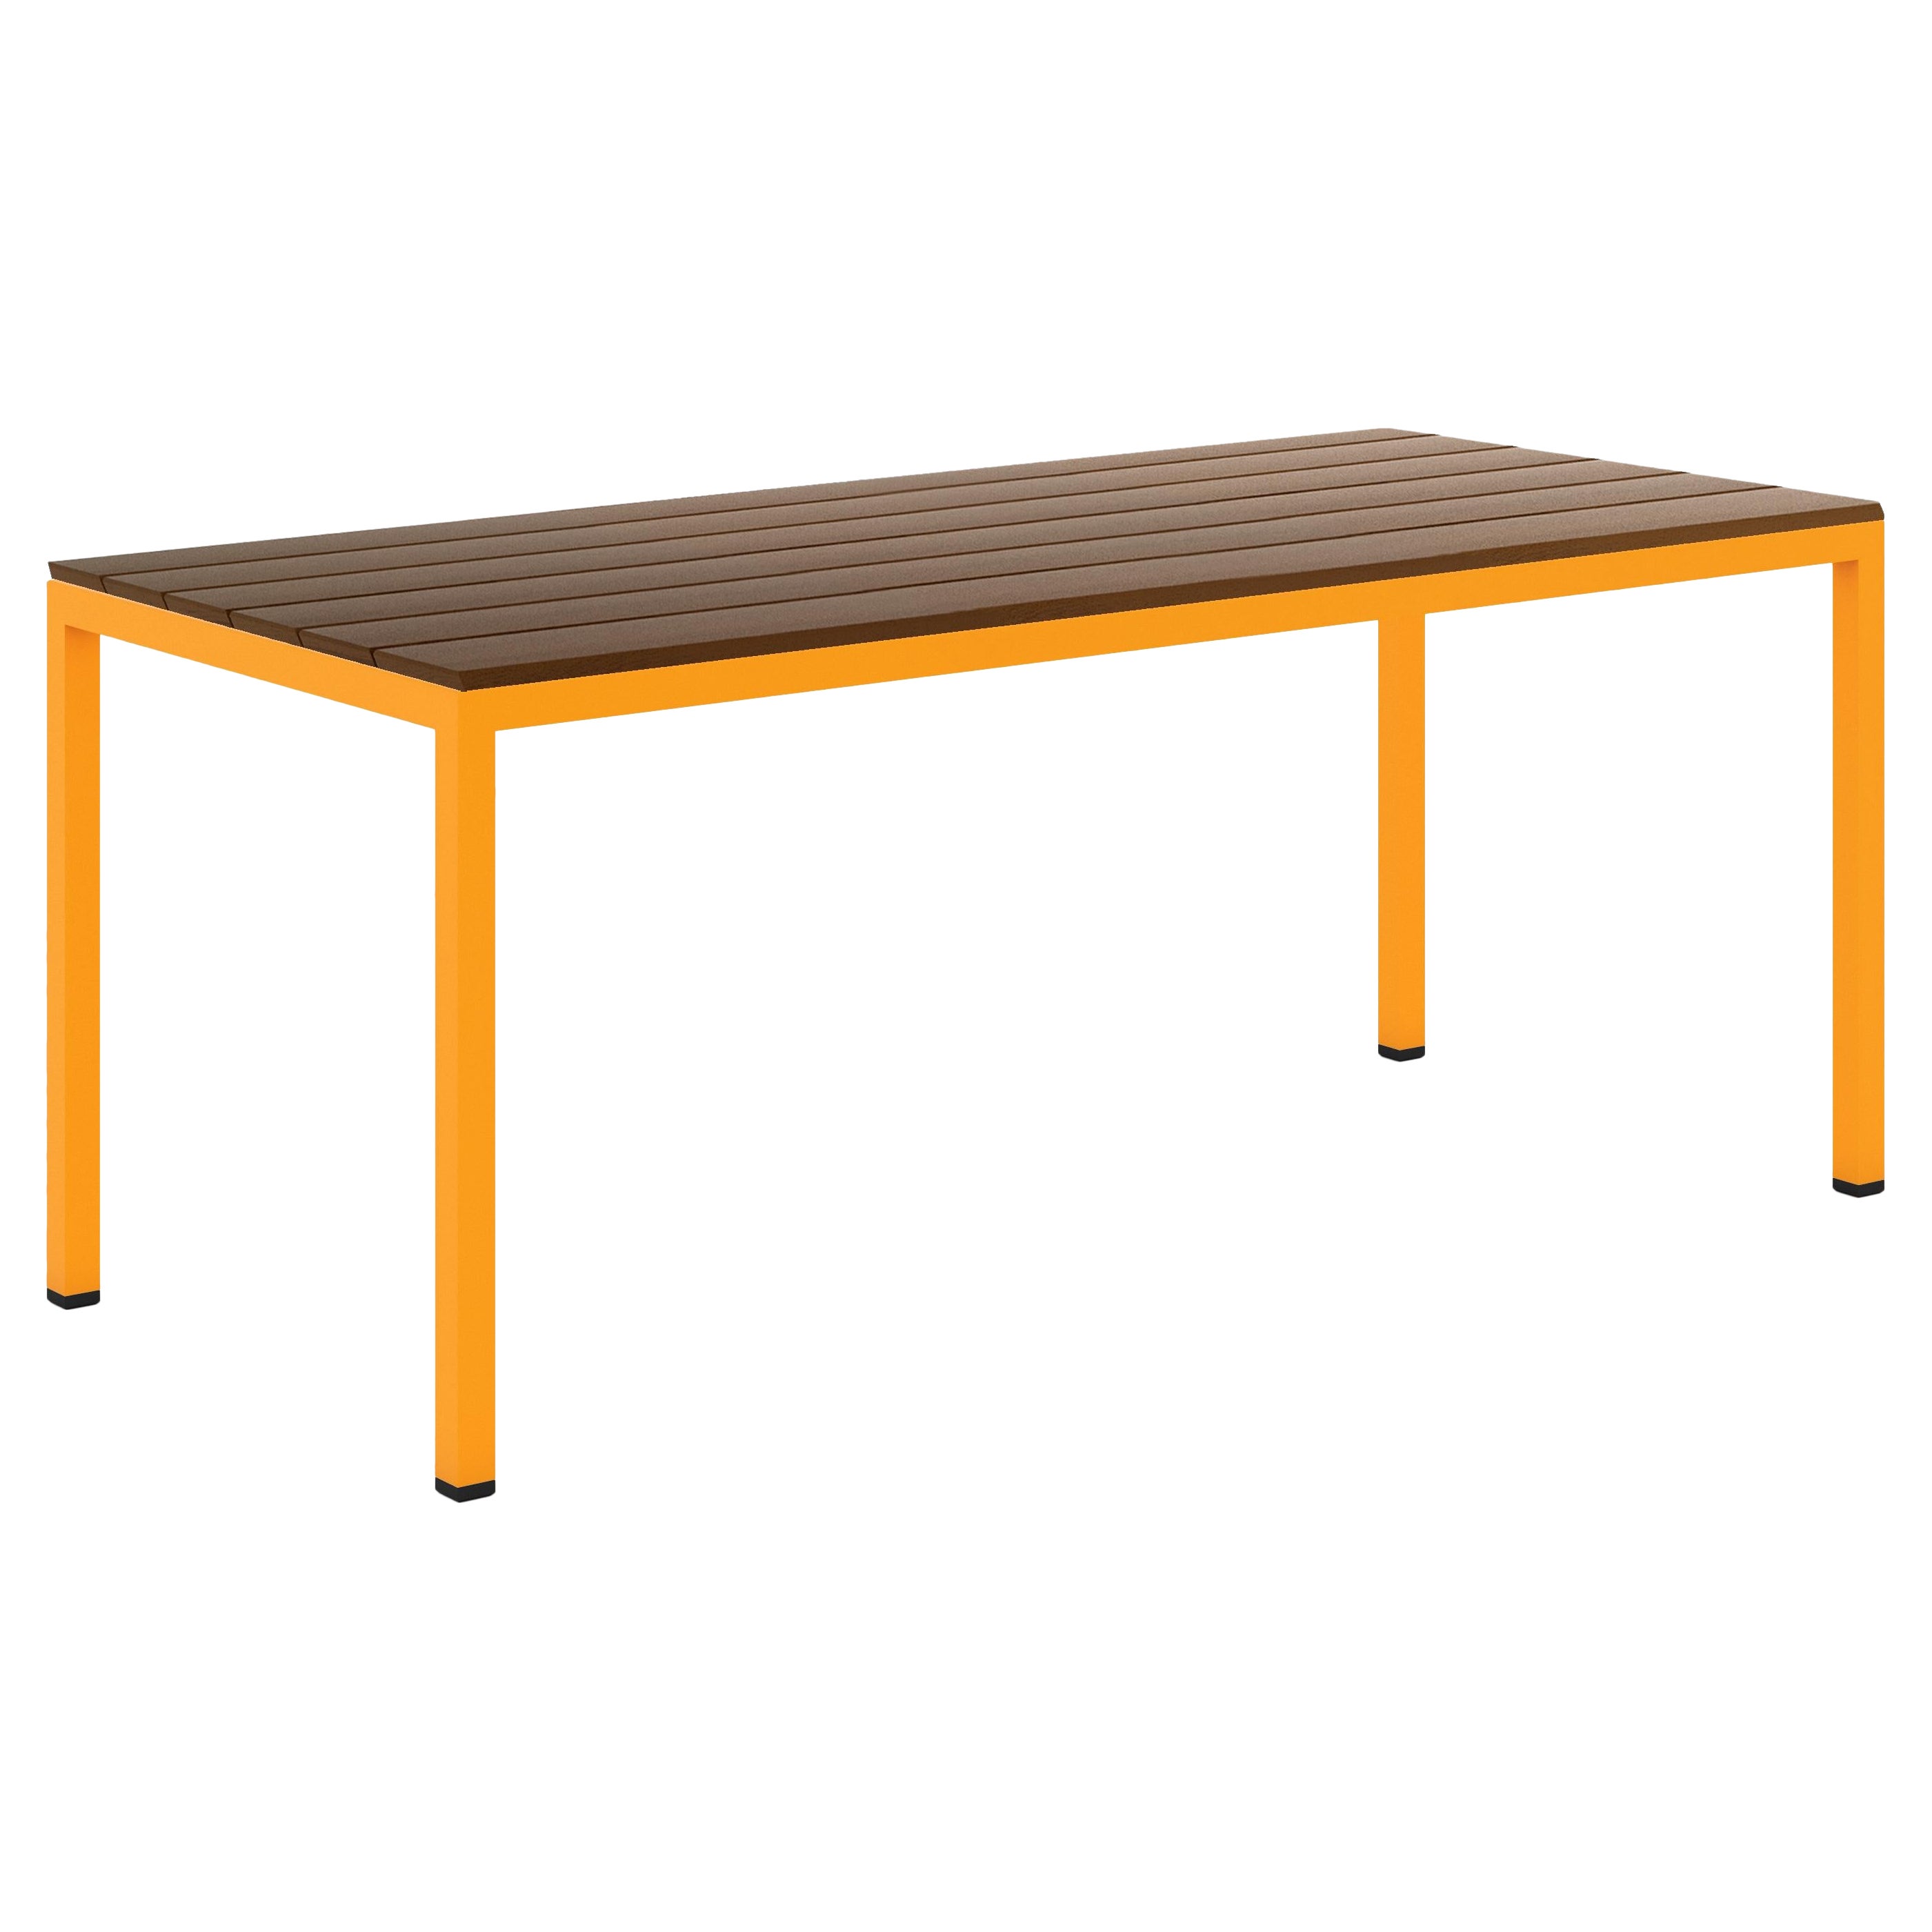 BICAtable Square Modern Outdoor Steel Table in Yellow with Ipê Wood 180x80cm